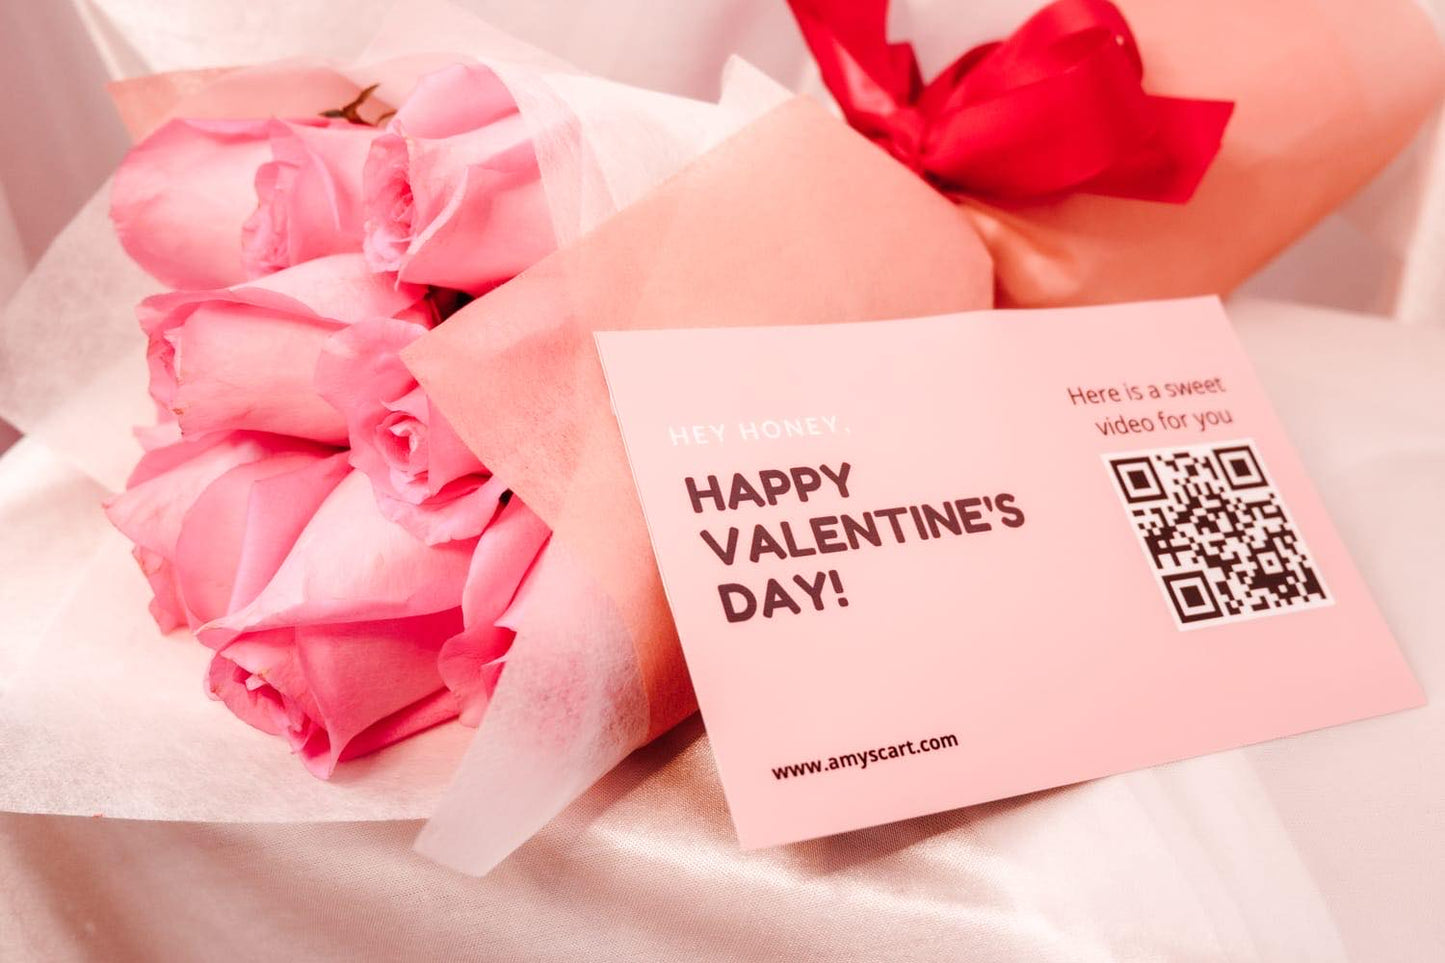 PINK ROSES - VALENTINE'S DAY BOUQUET & VIDEO MESSAGE CARD